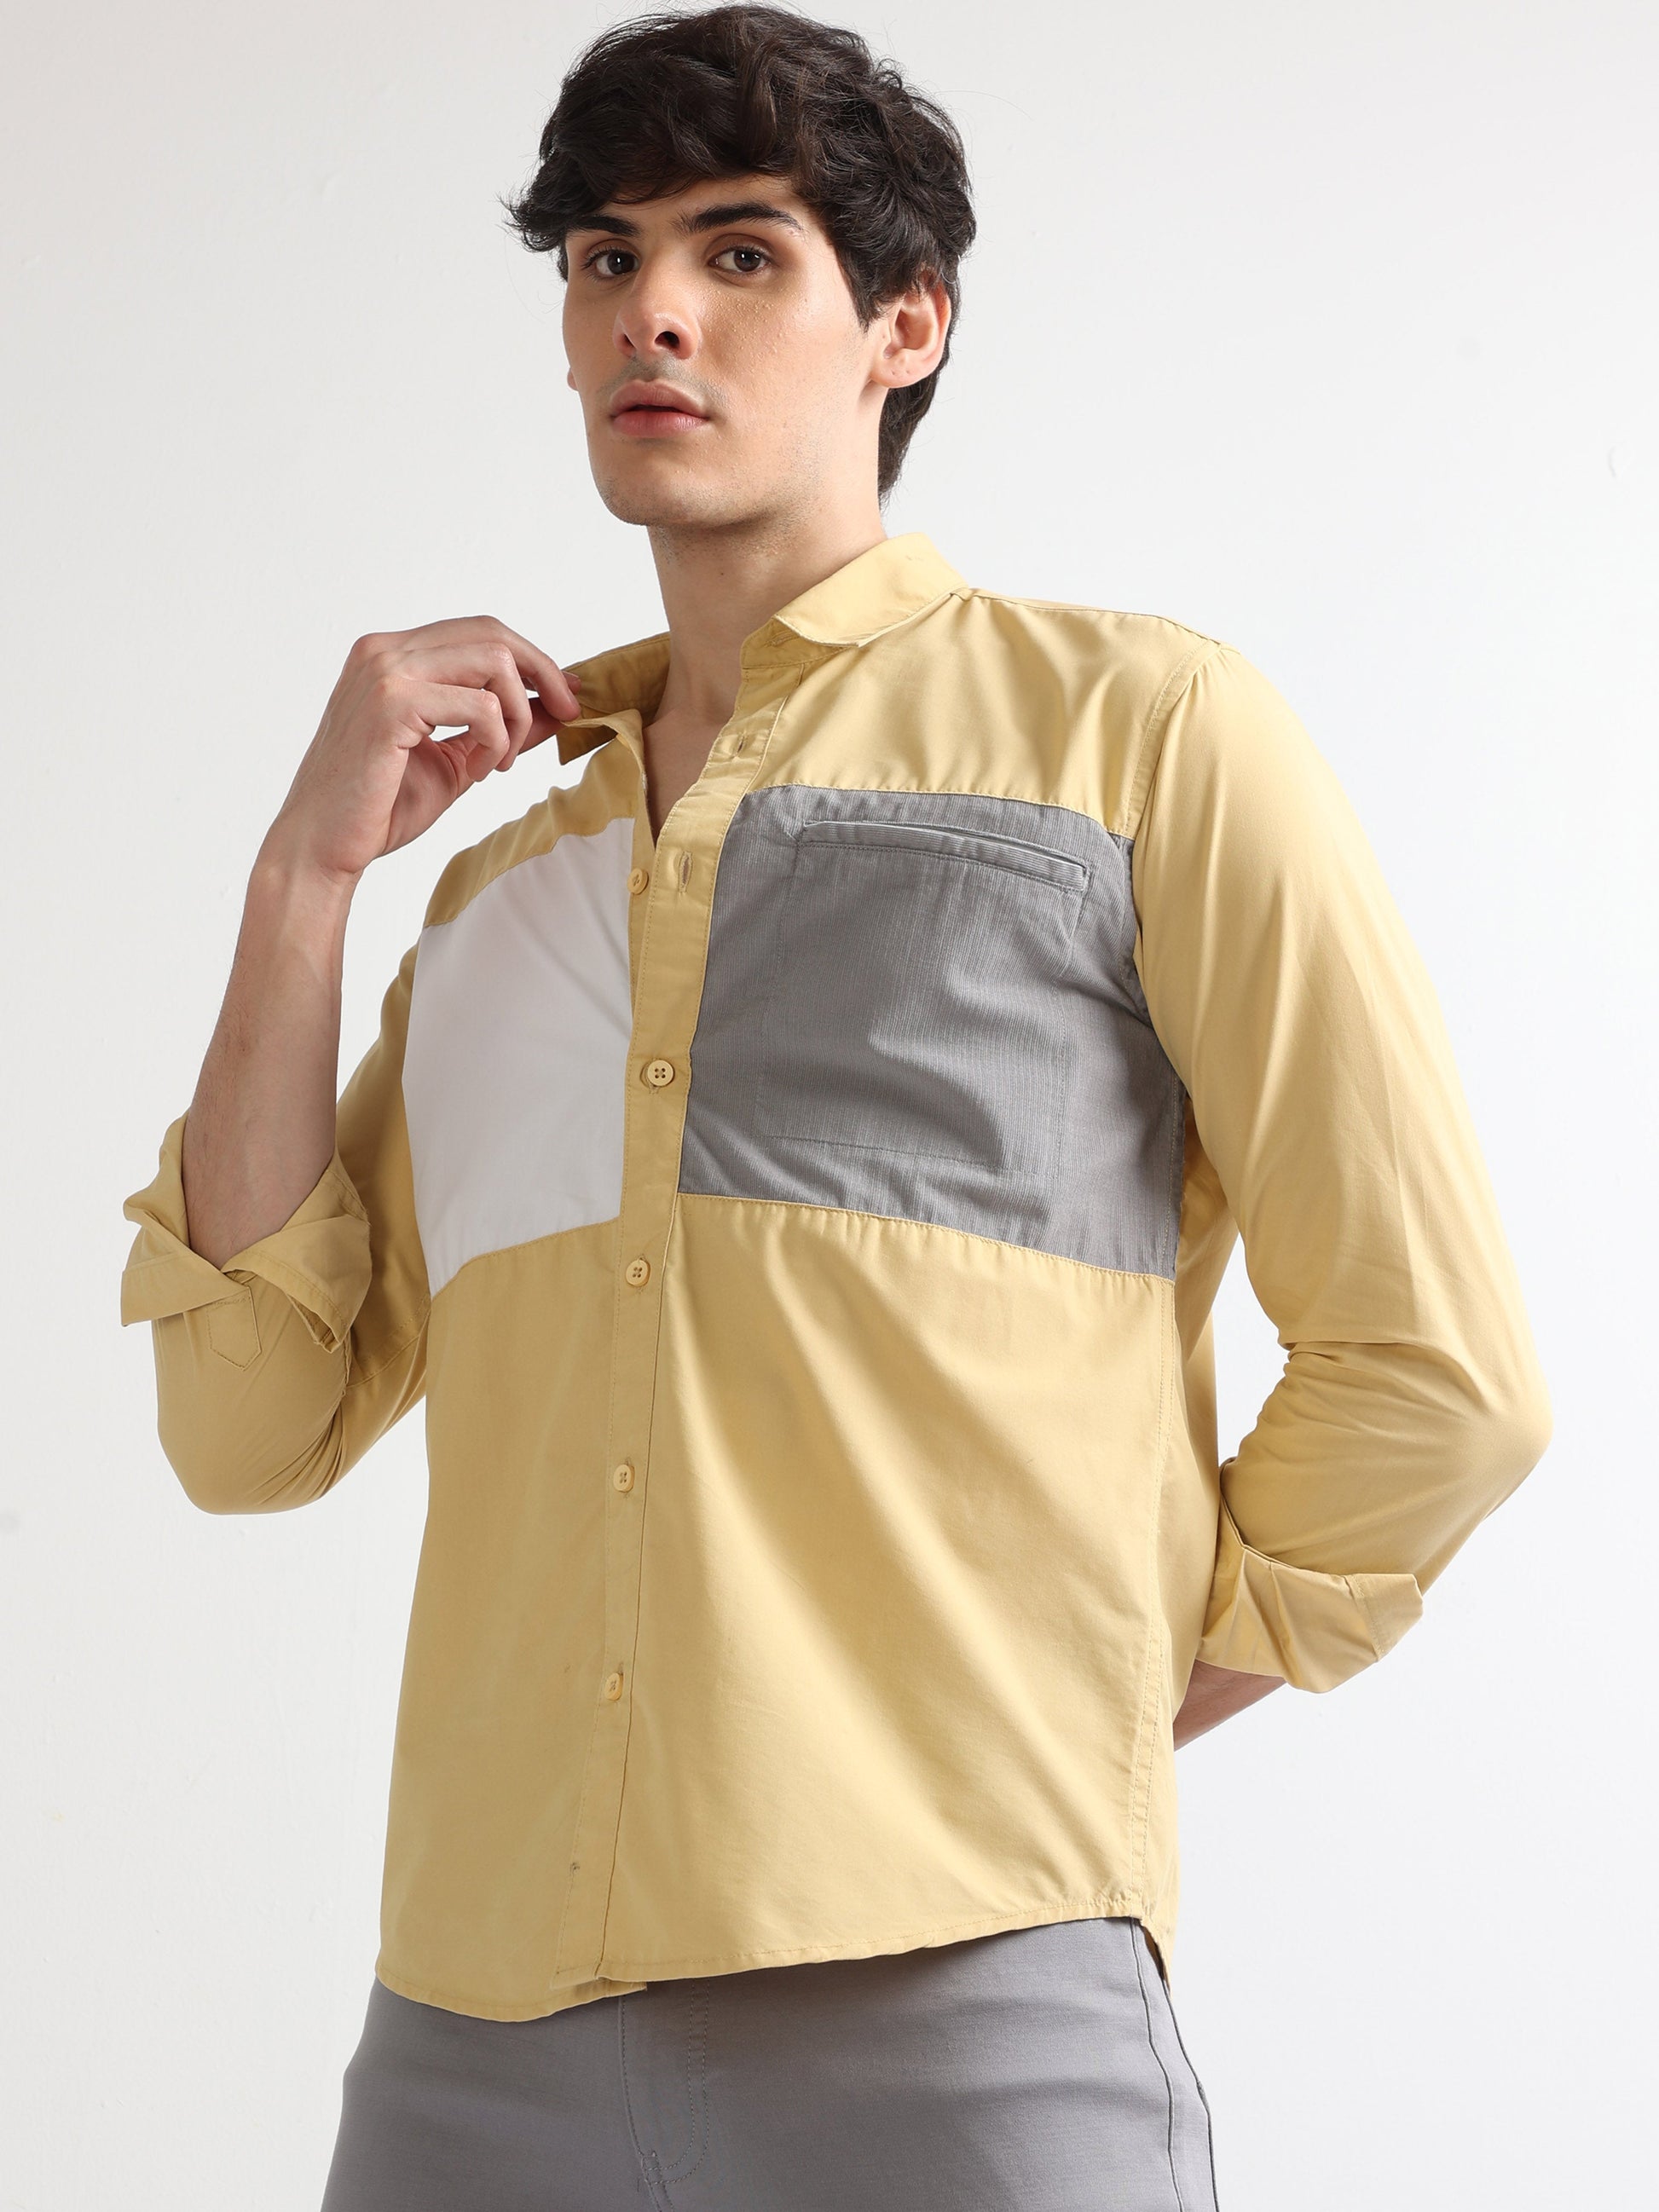 Buy Finest Poline Cut And Sew Casual Stylish Shirt Online.